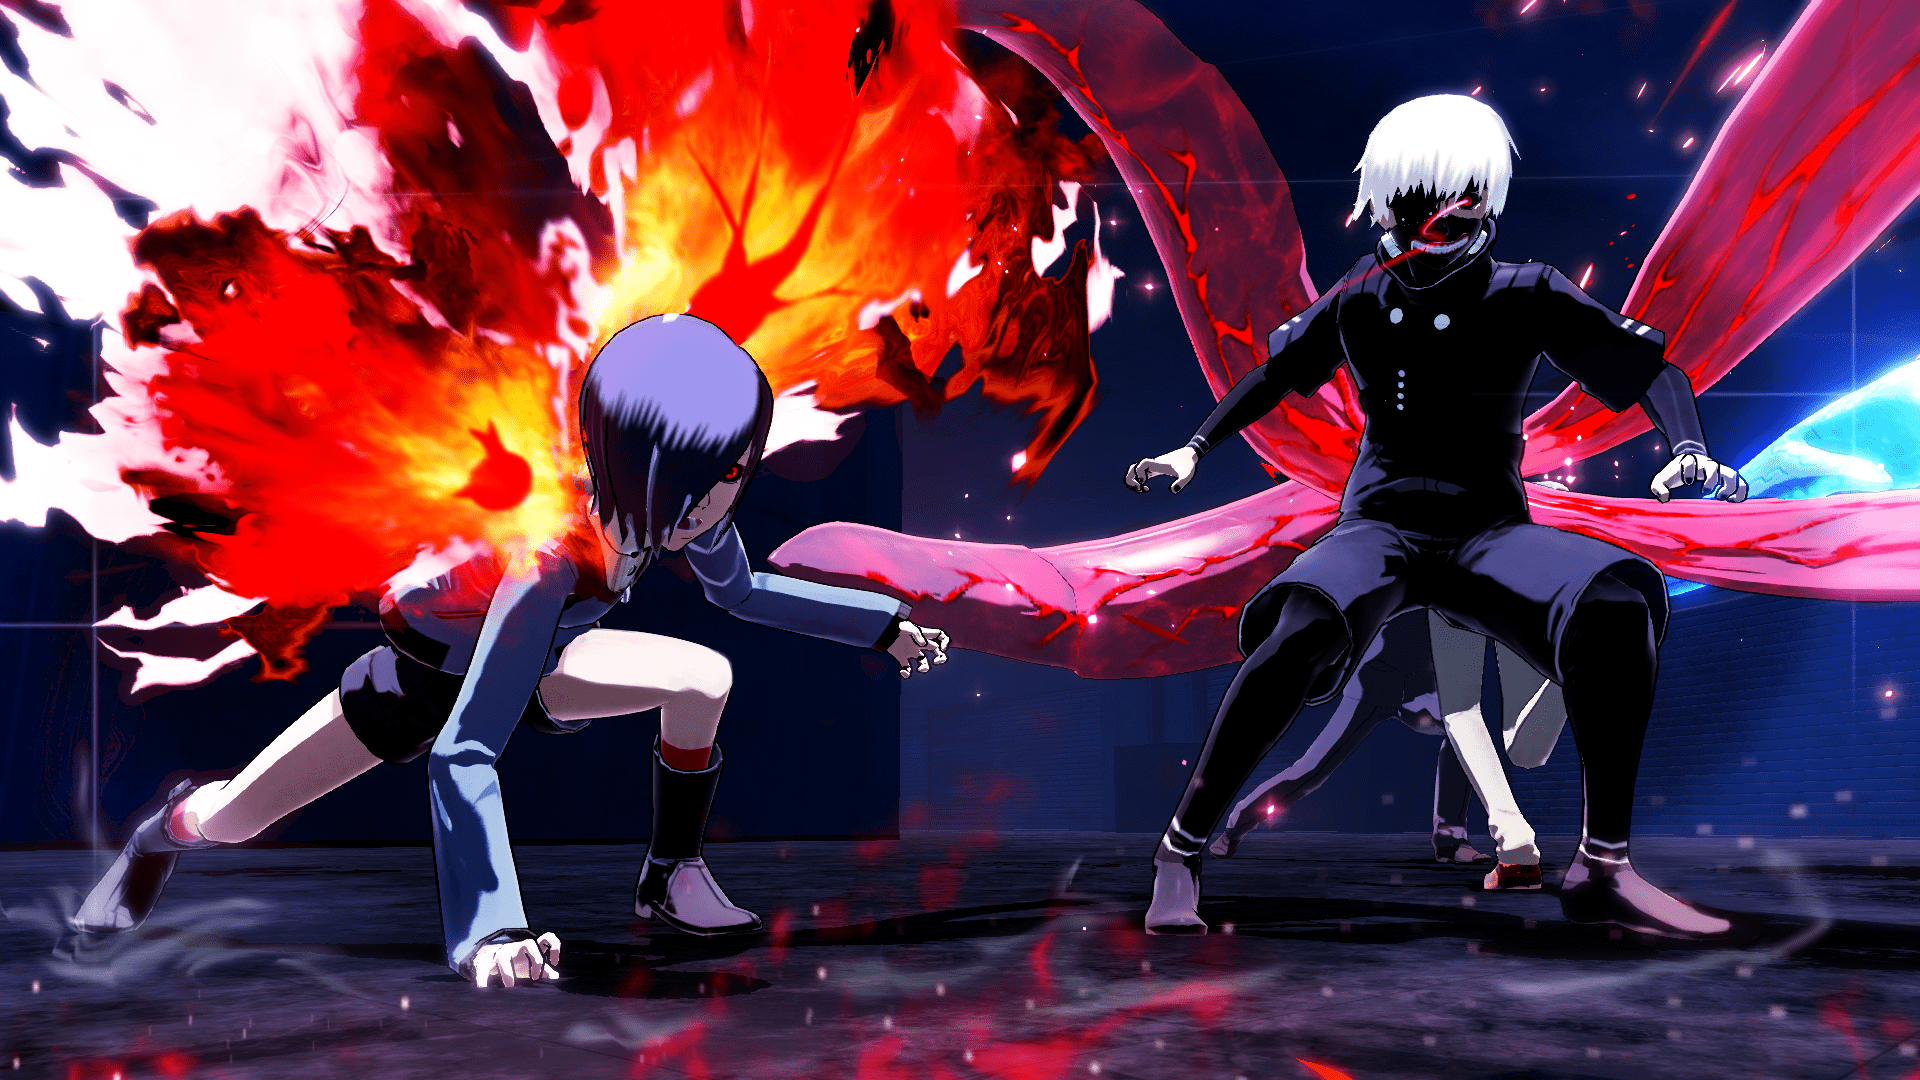 sony ps4 tokyo ghoul